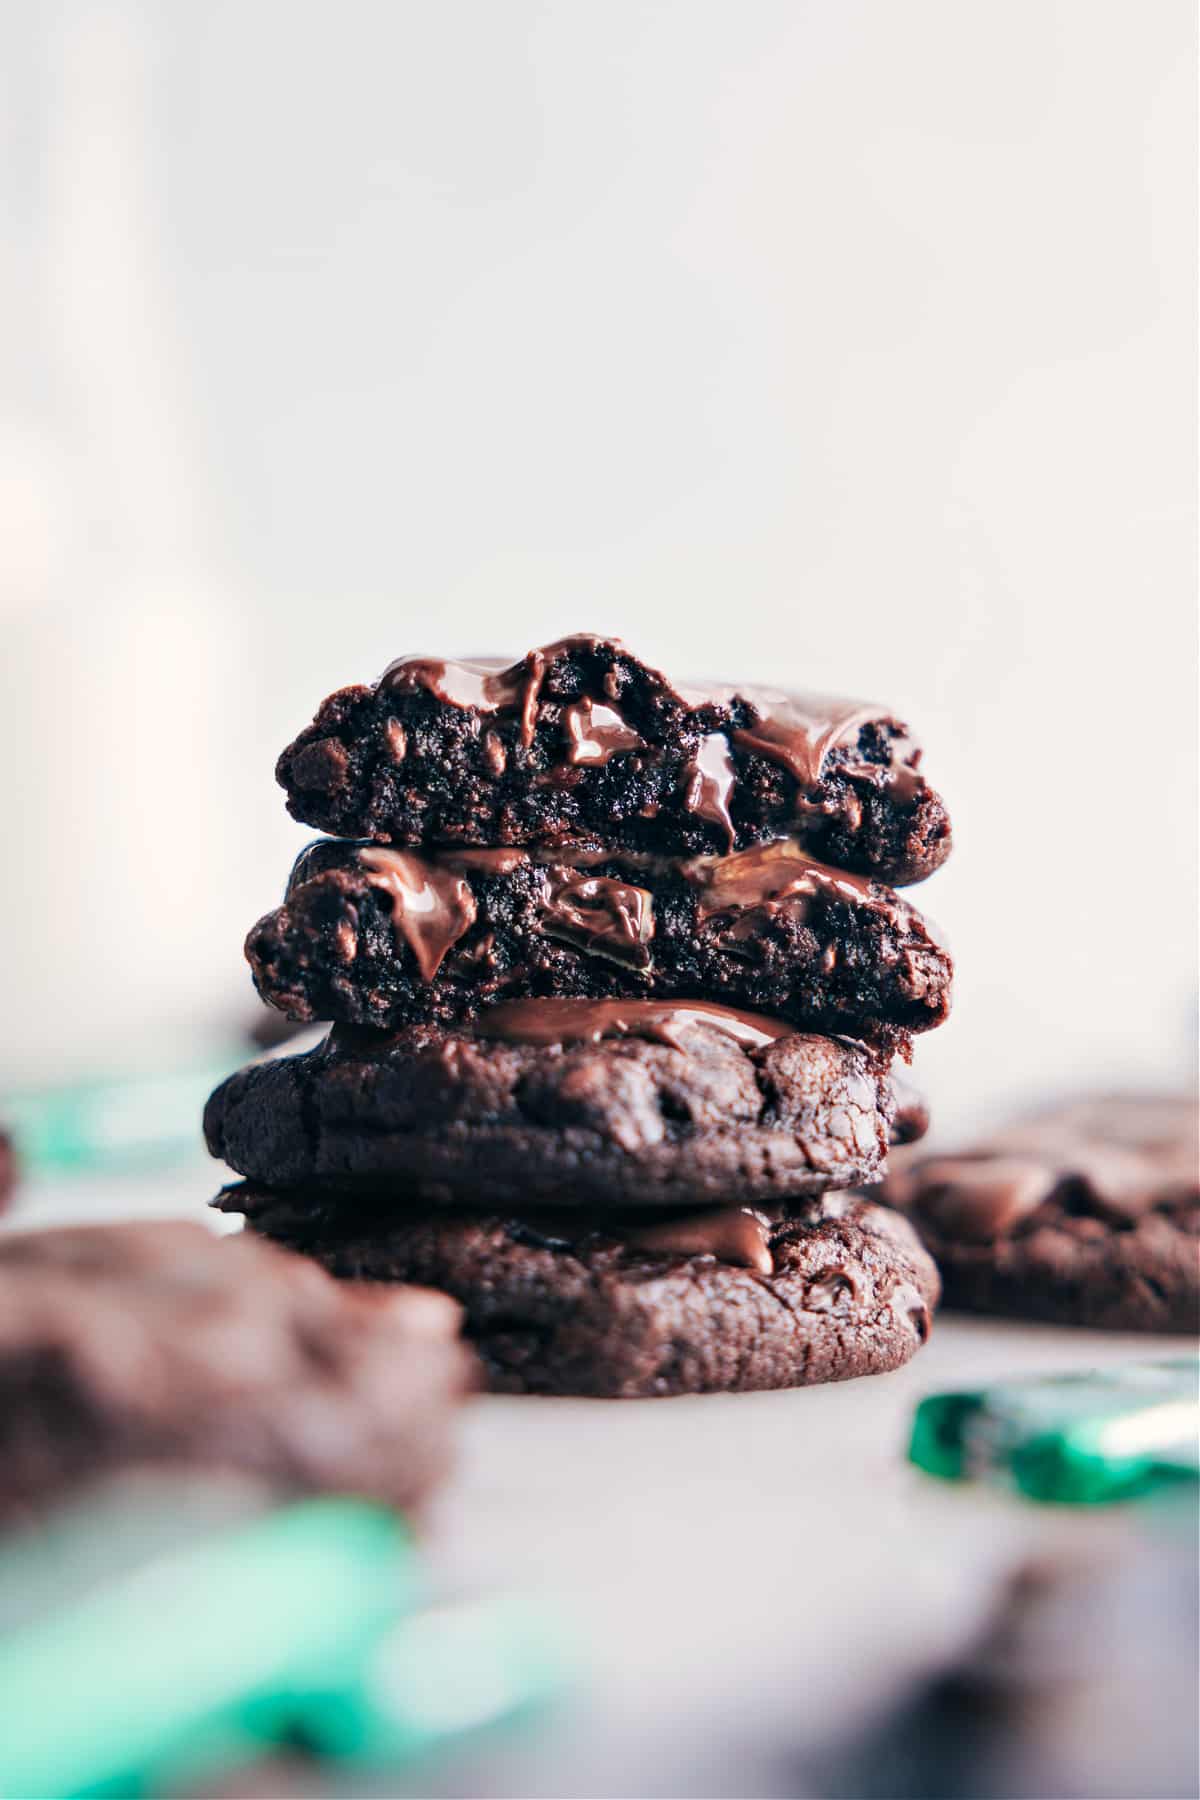 A stack of delicious andes mint cookies with chocolate dripping down, creating a mouth-watering dessert.